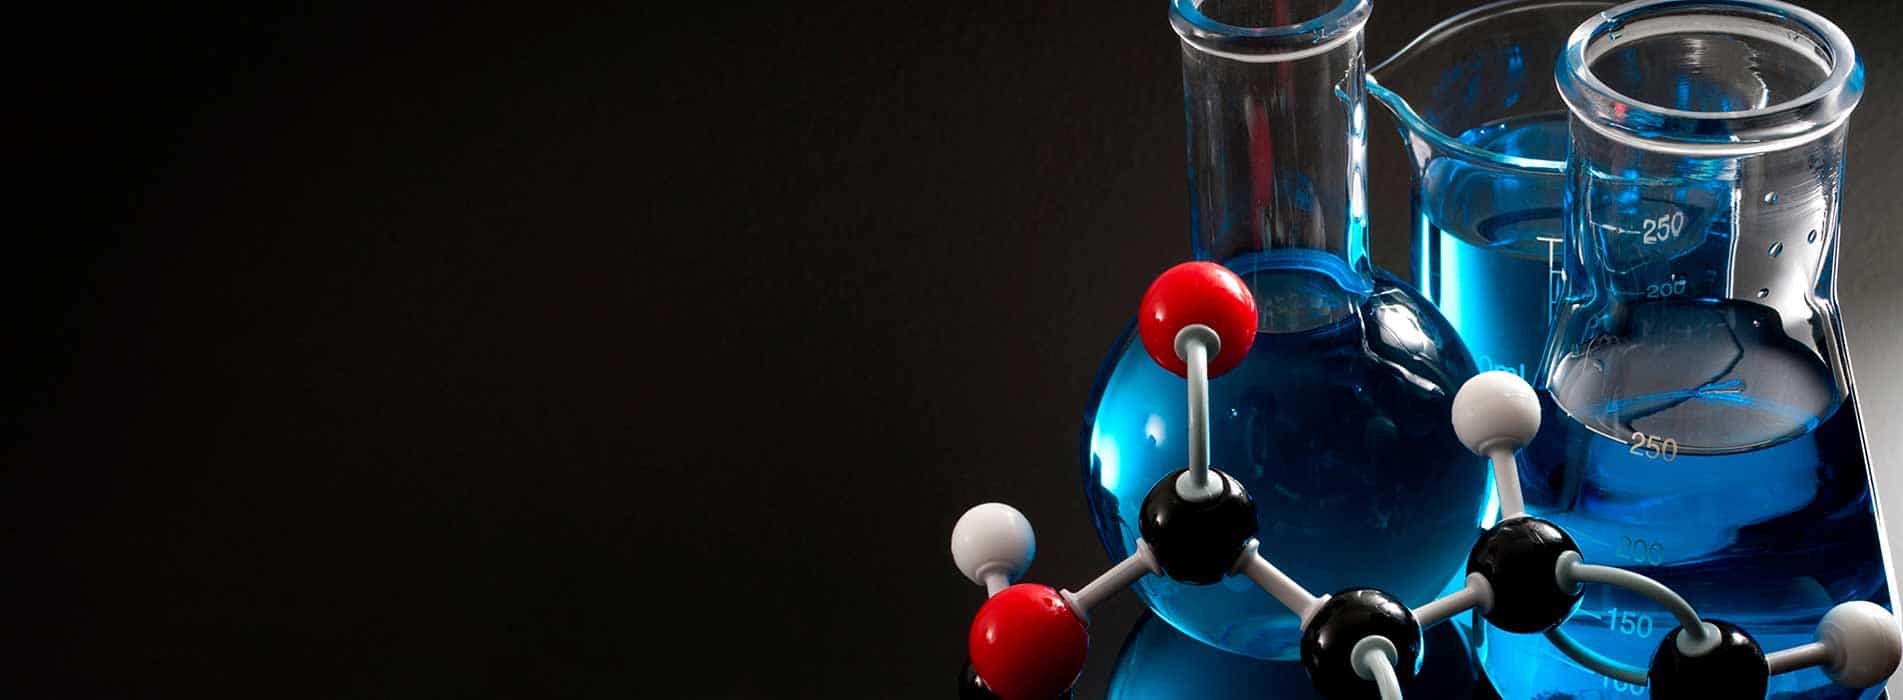 Homeschool chemistry curriculum banner of beakers with blue fluid and ball-and-stick molecular model